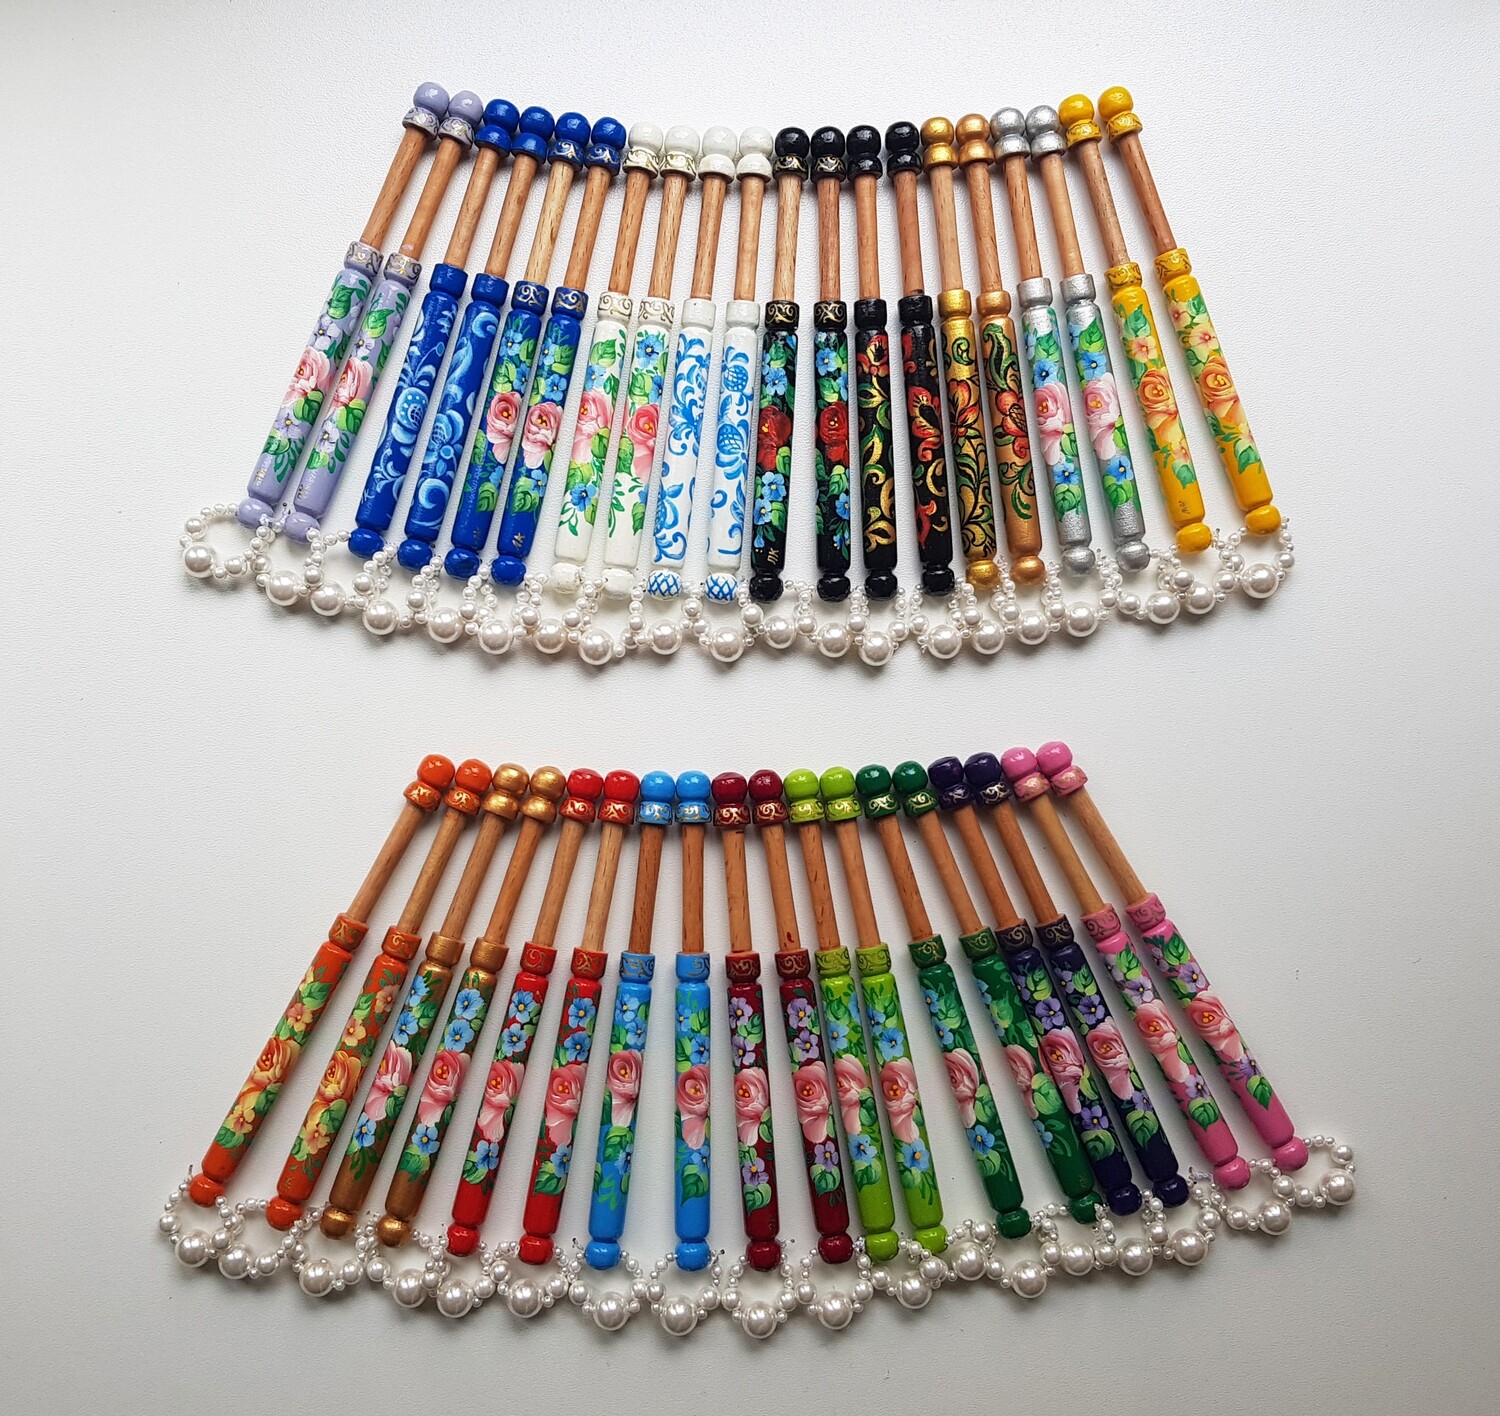 A Set of 38 Spangled Lacemaking Bobbins With Beads Made of Beech Hand Painted